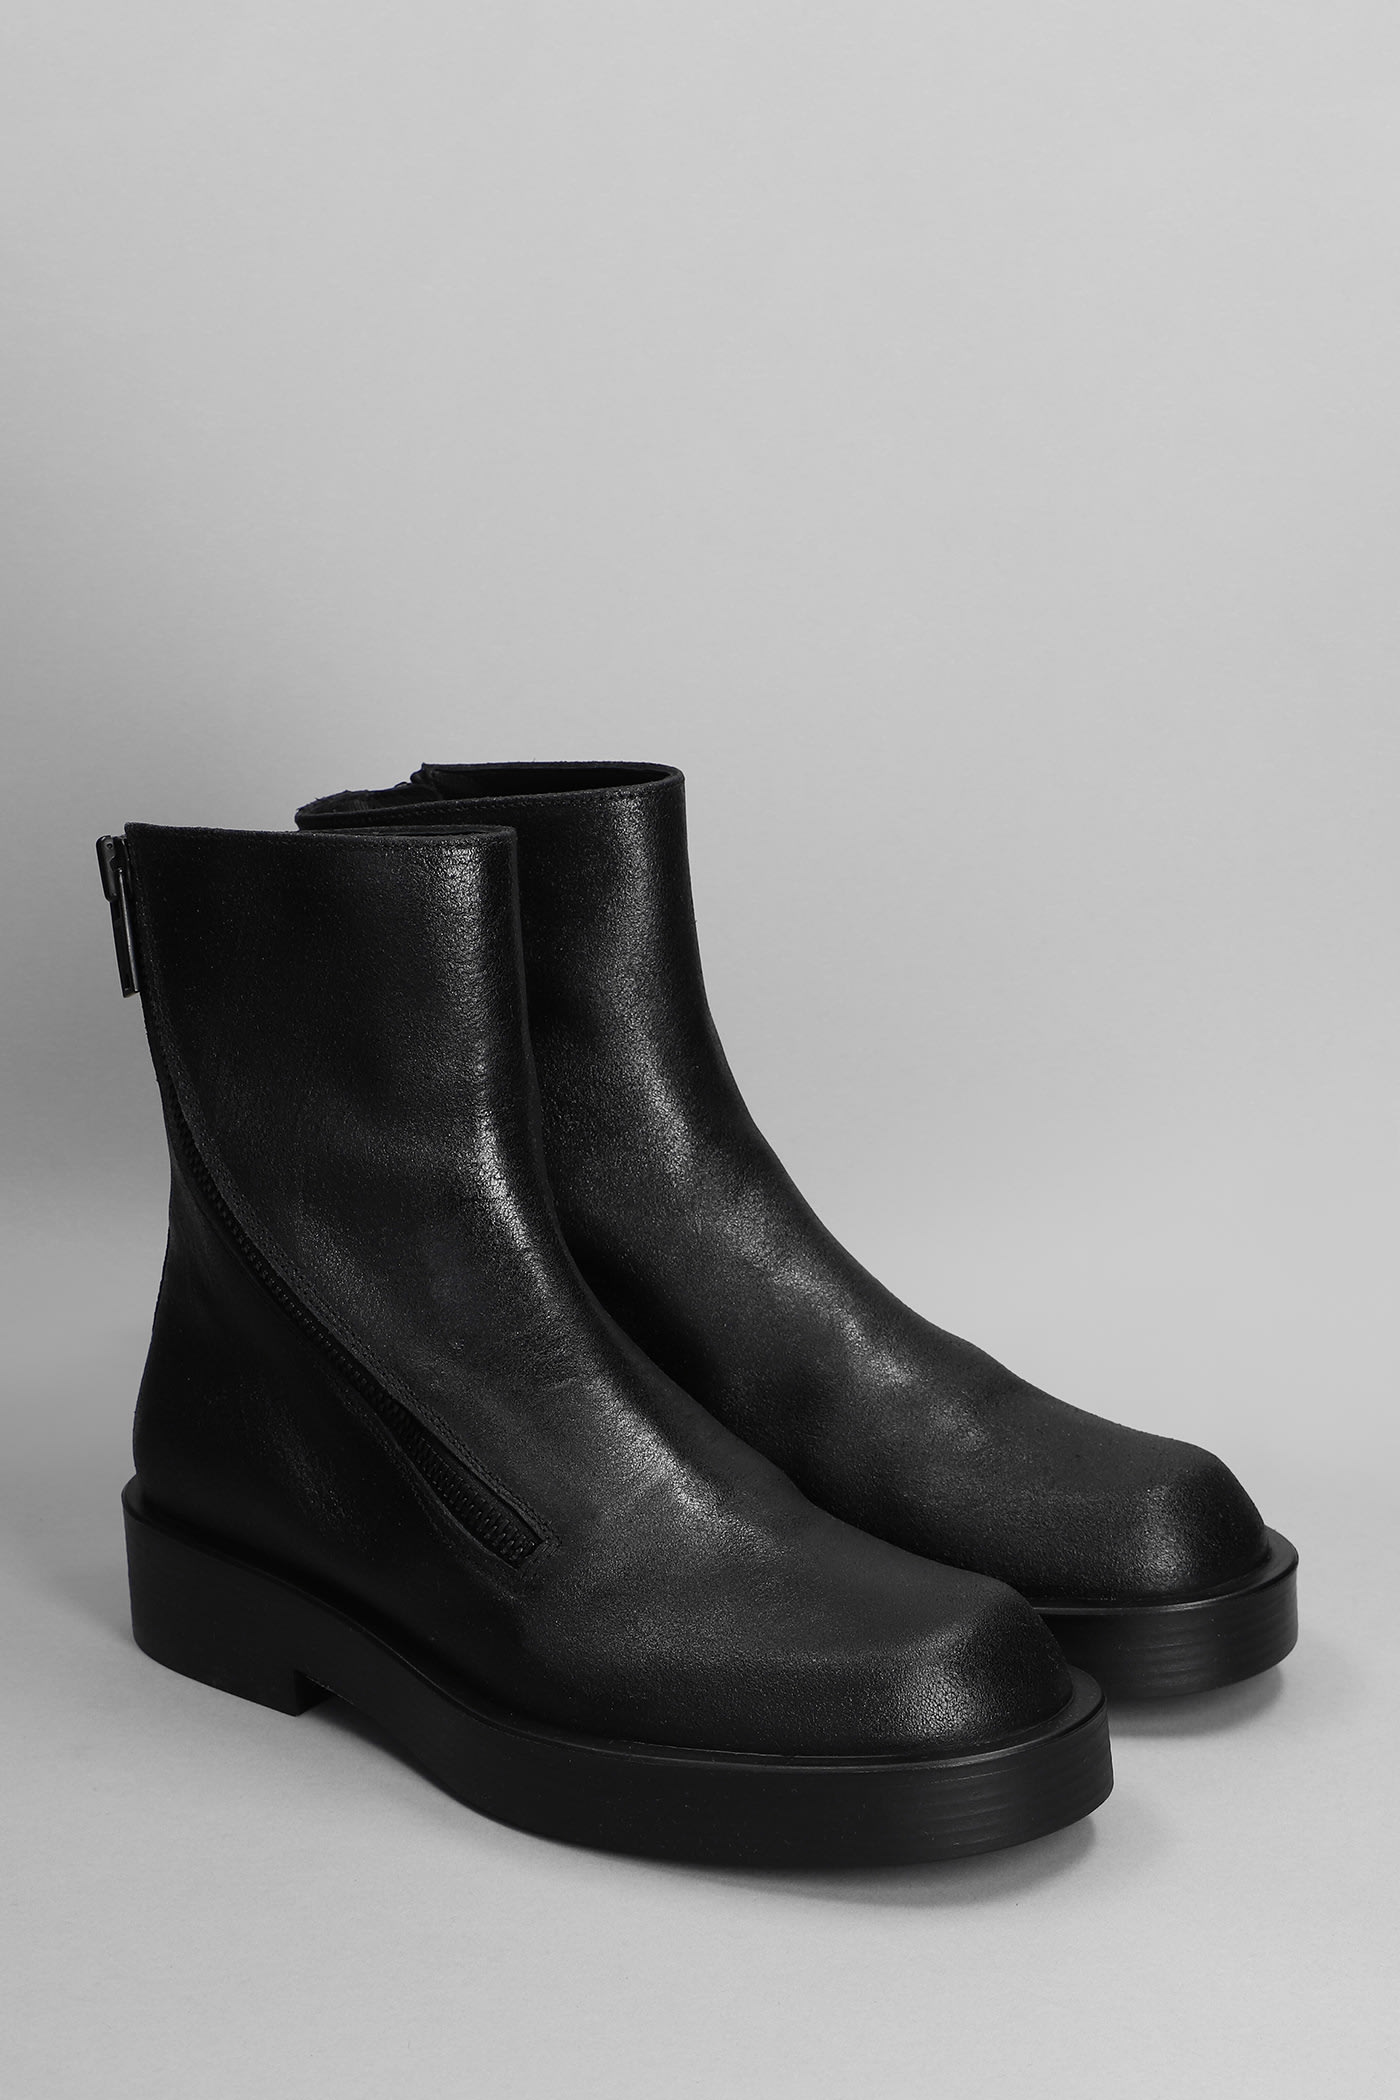 CT70US8Ann Demeulemeester Ernest ankle boots - 靴